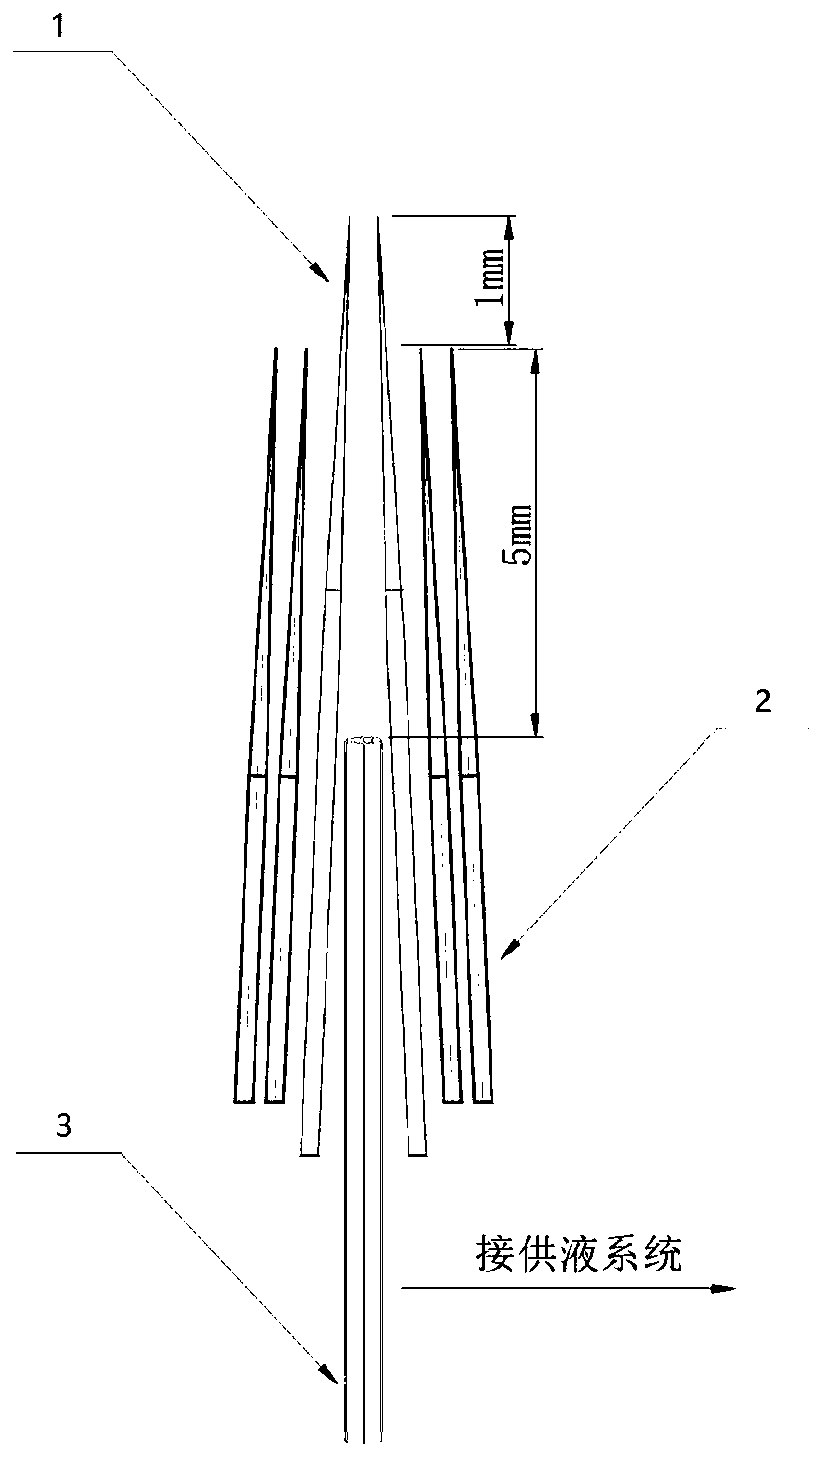 A brush type liquid guiding and infiltrating device